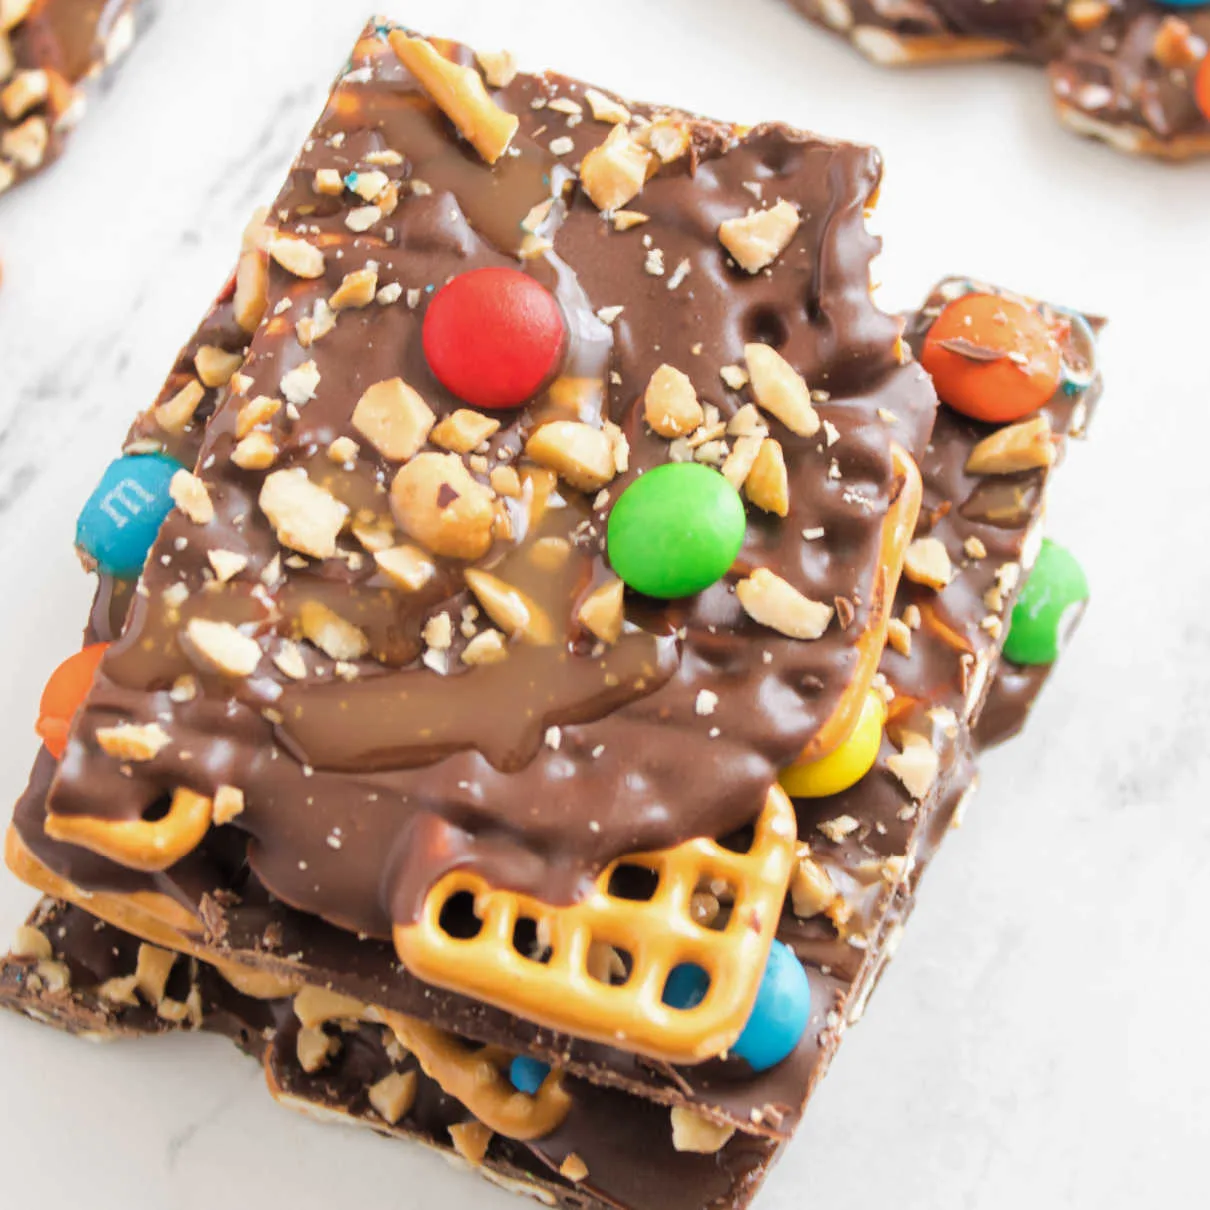 Close up of chocolate pretzel bark with caramel drizzle, chopped peanuts and m&ms on top.